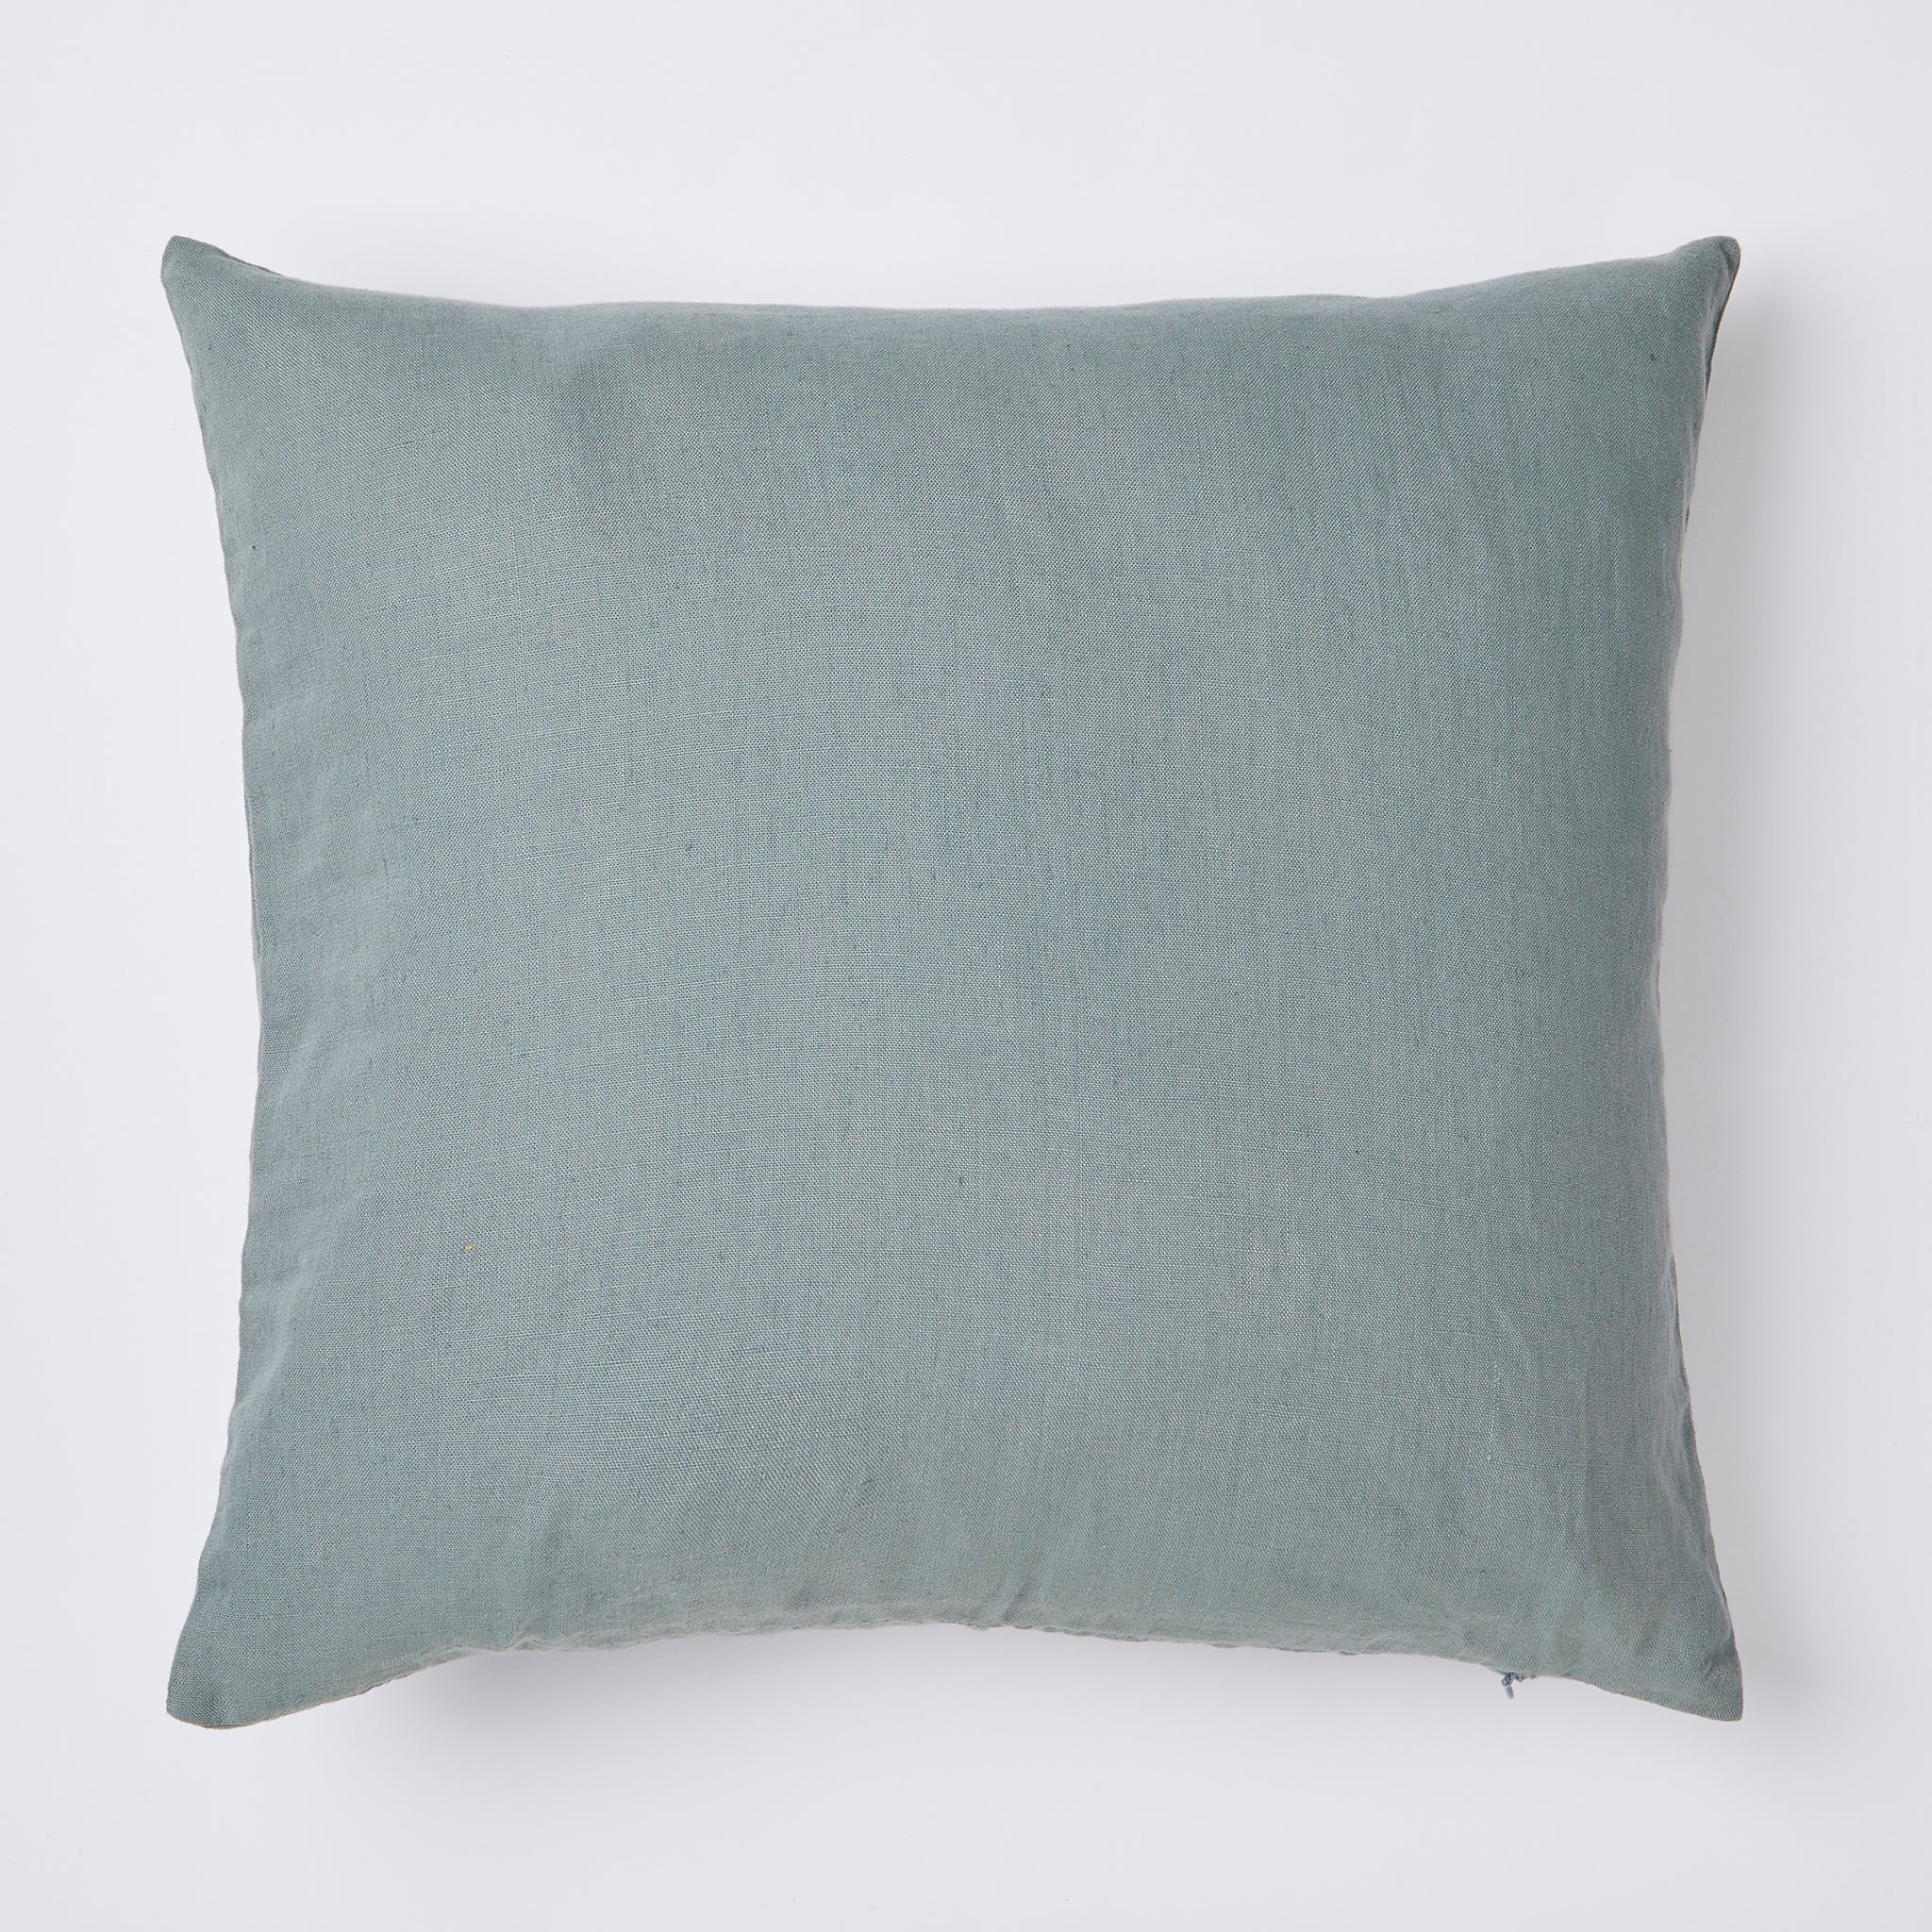 Linen cushion in mineral blue.